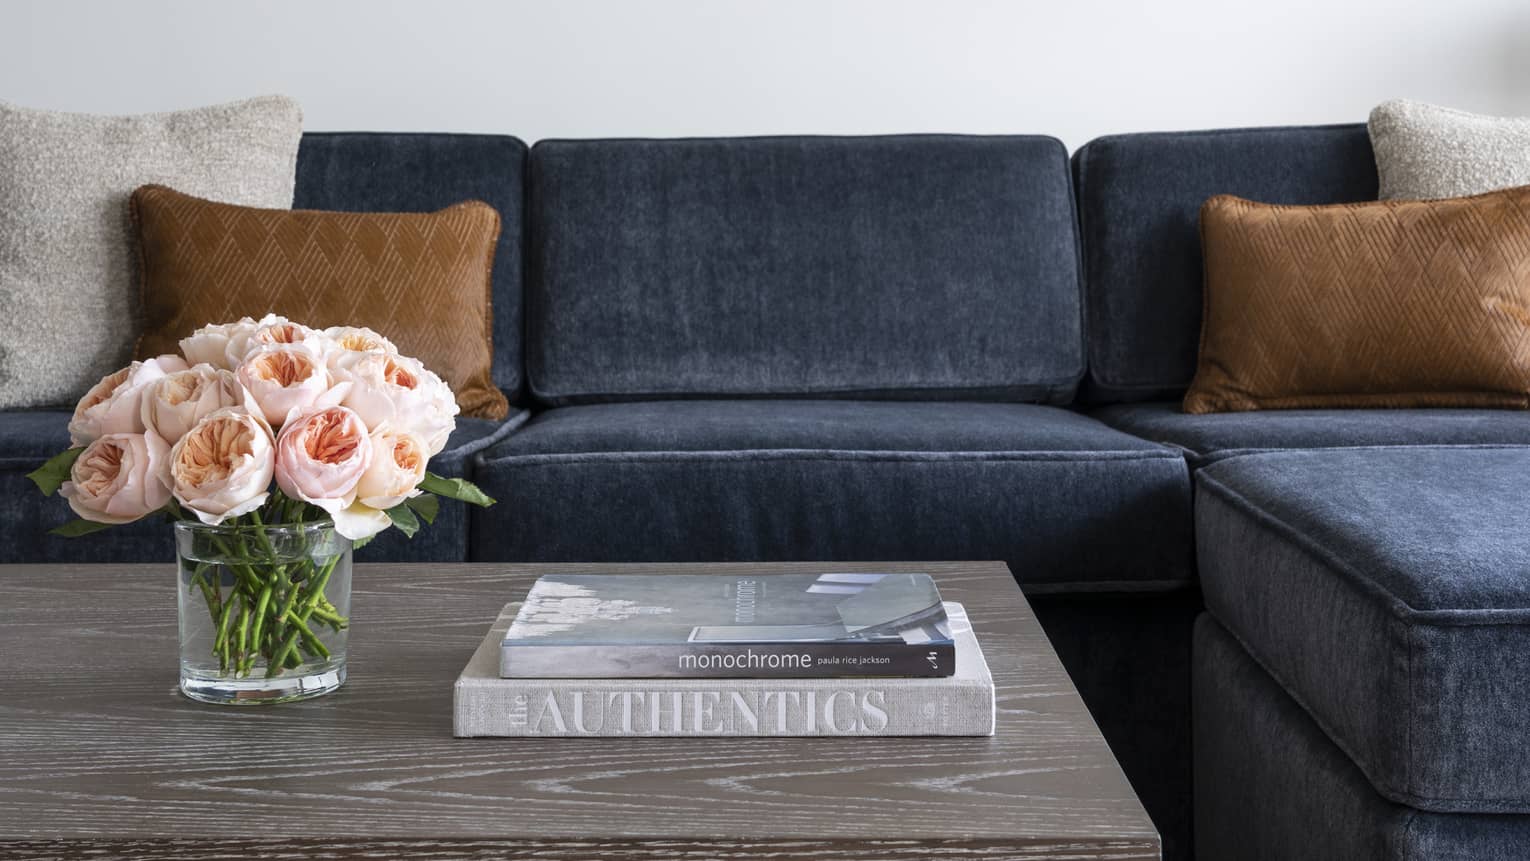 A blue couch near a grey coffee table with books and flowers on it.